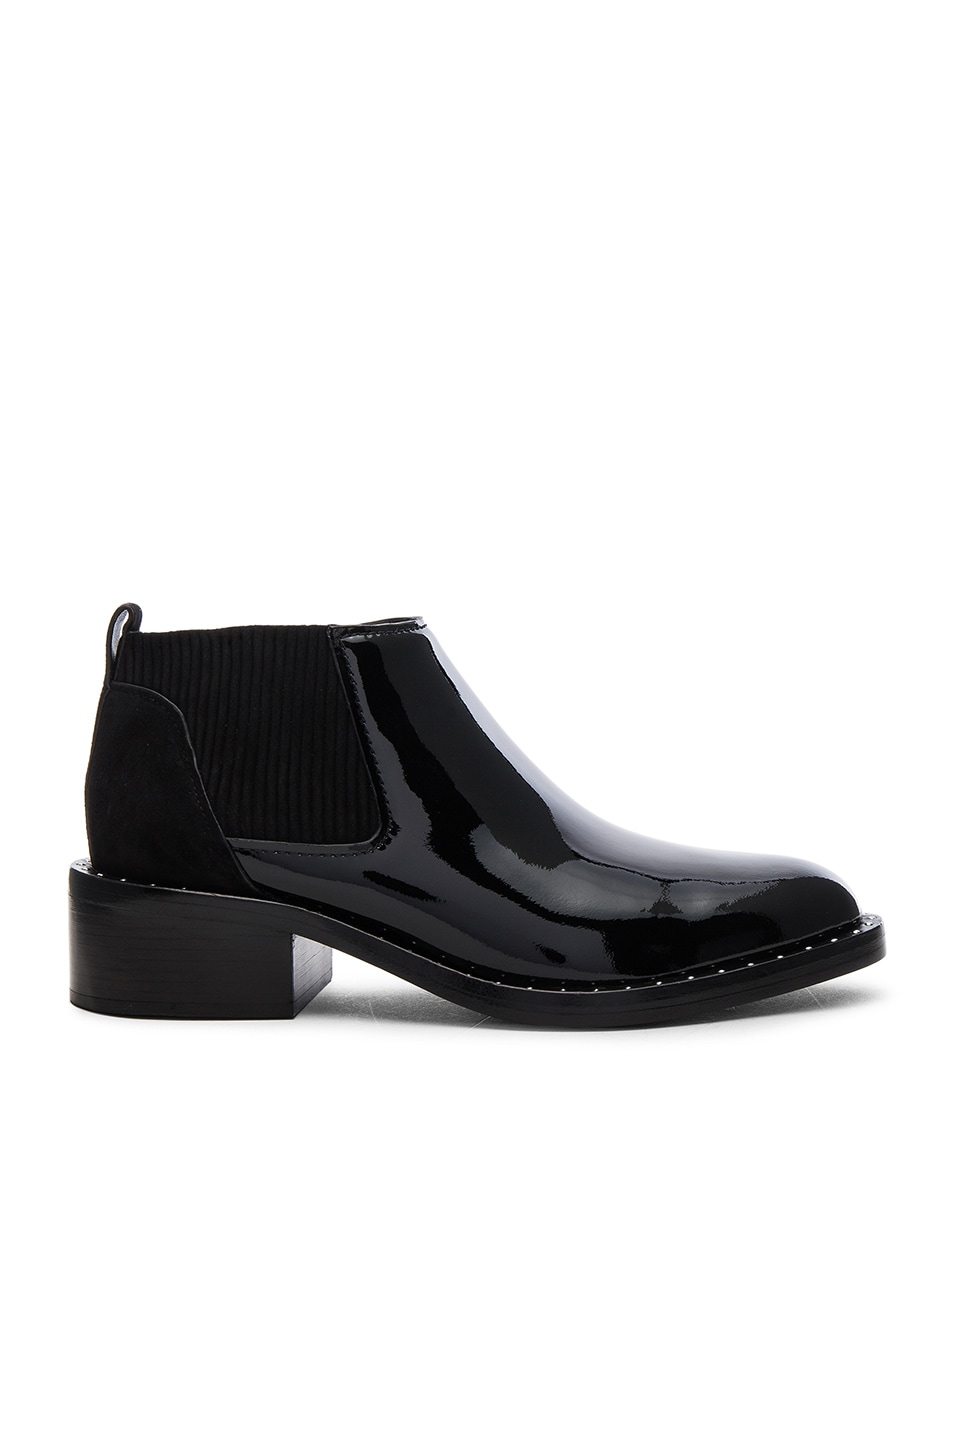 Image 1 of 3.1 phillip lim Patent Leather Alexa Studded Welt Booties in Black